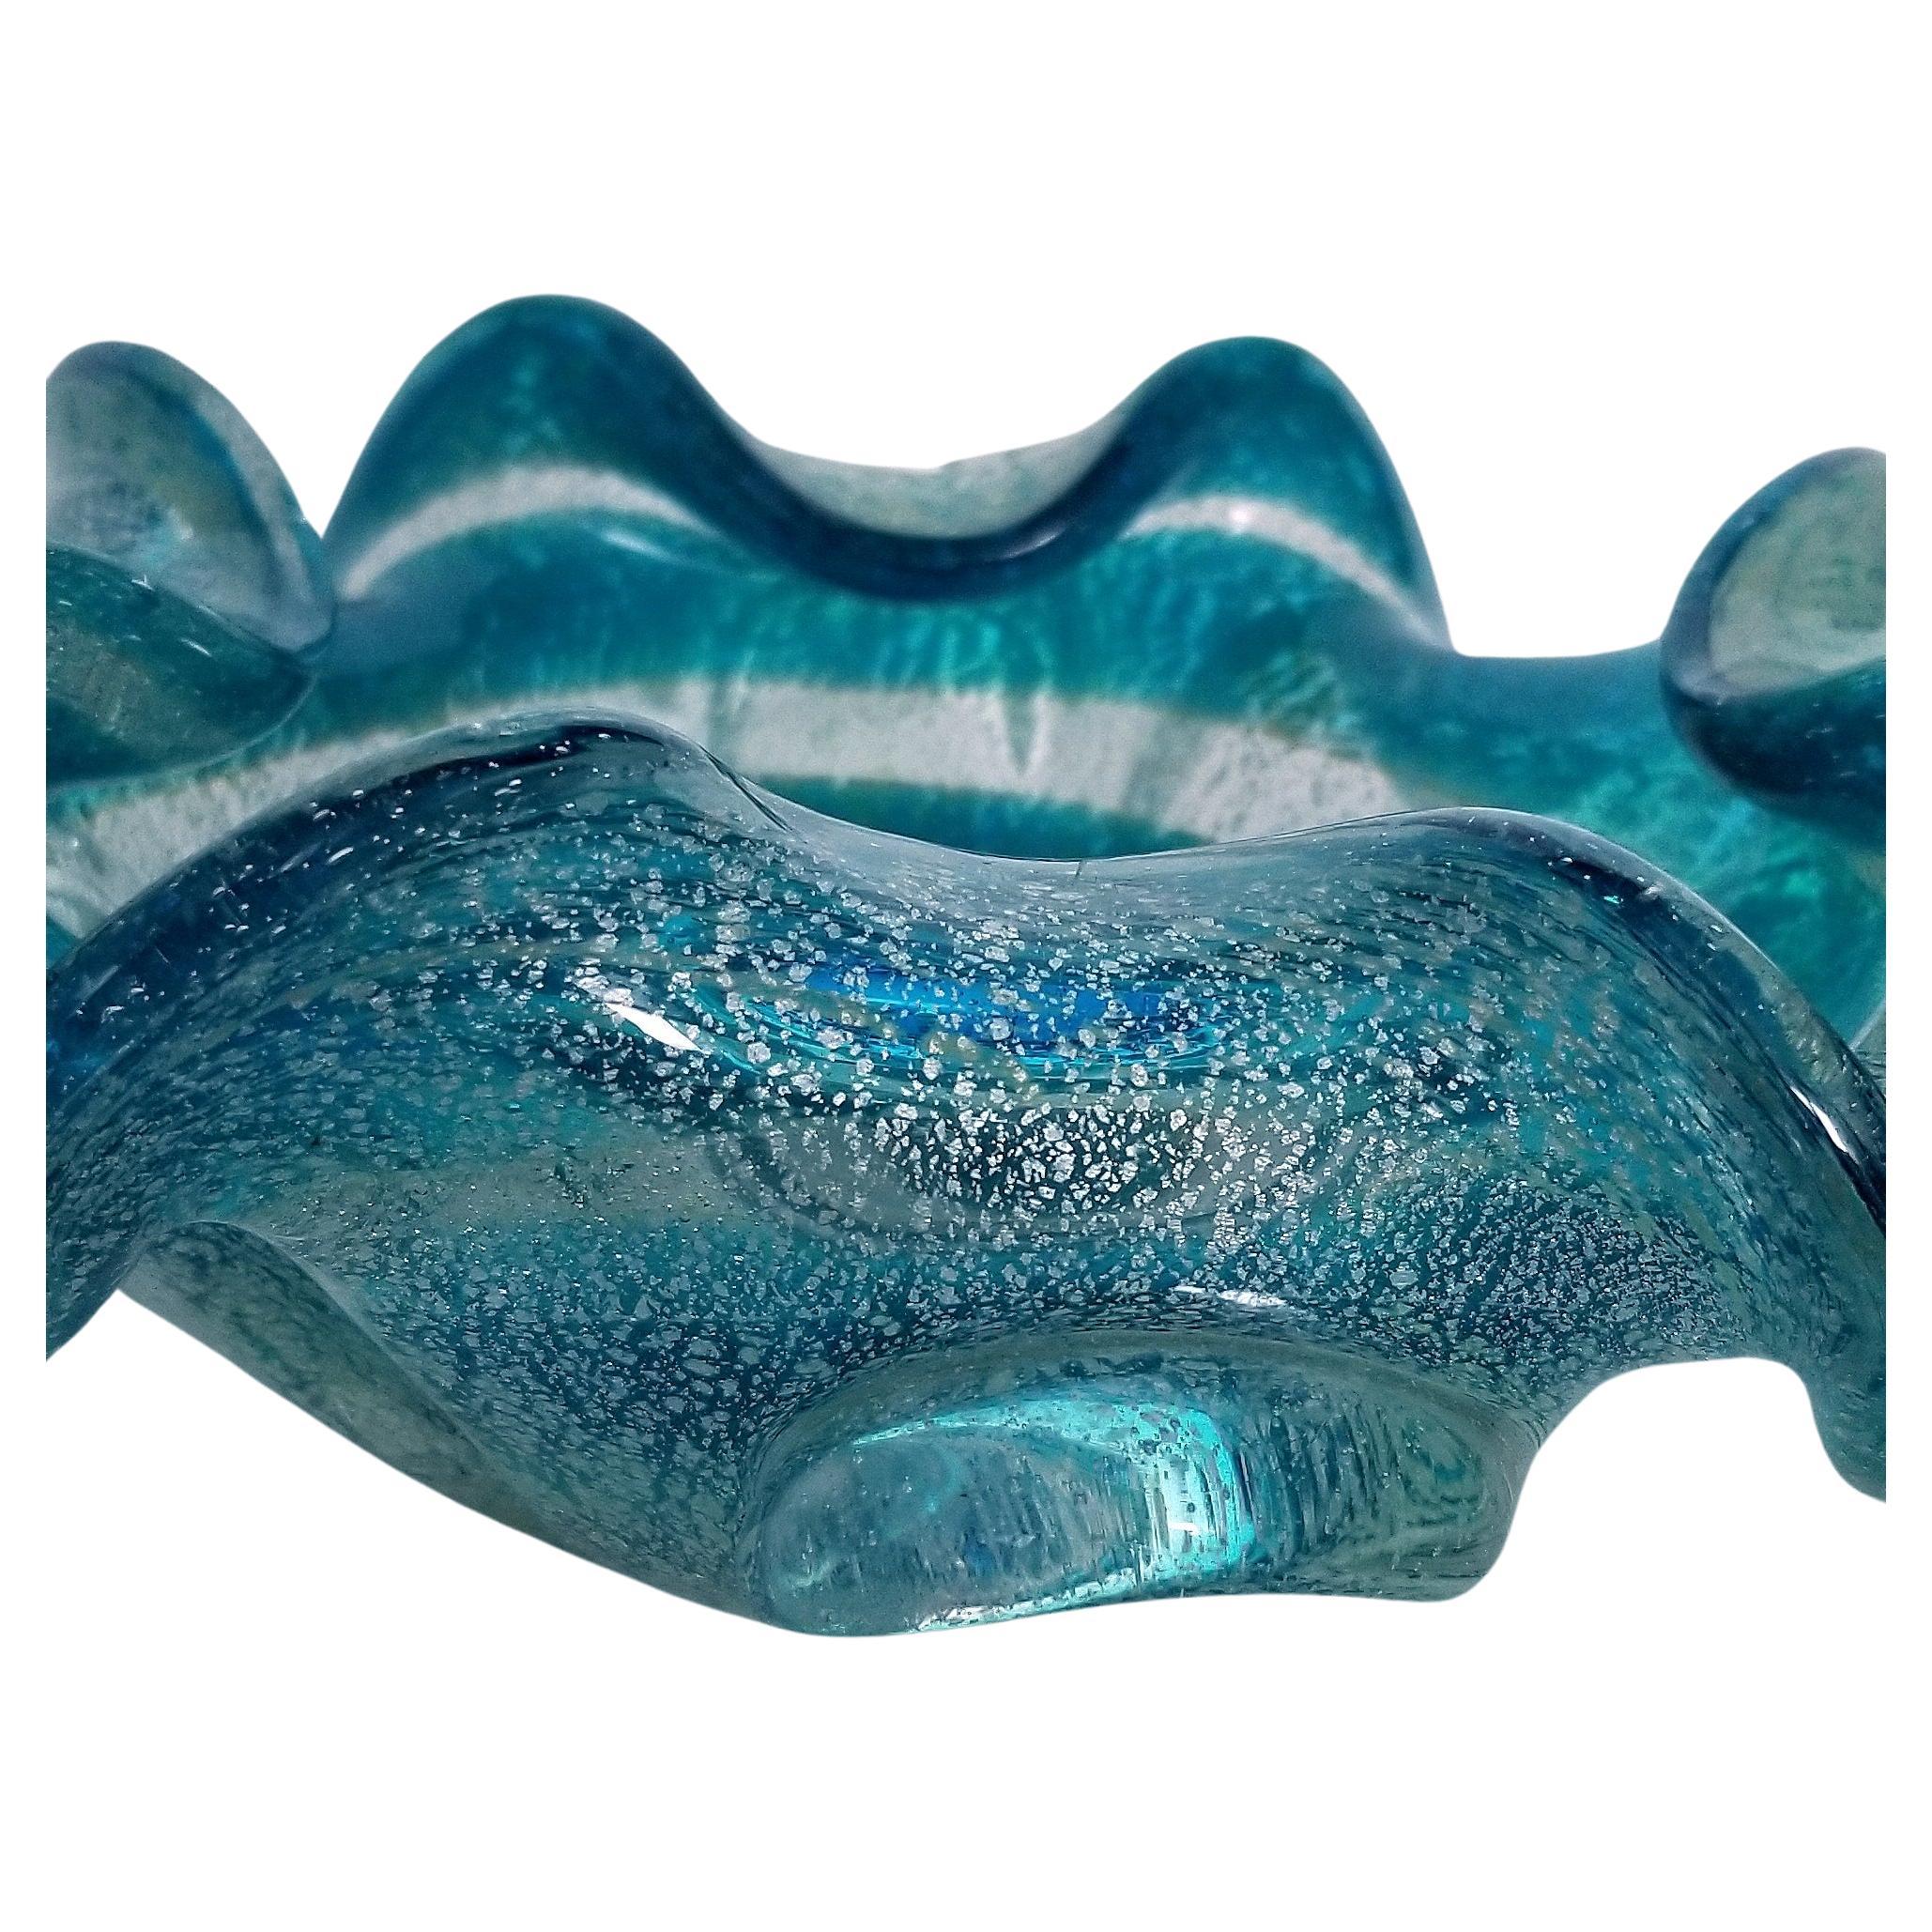 Blue and Silver Murano Glass Ashtray or Catch-all Bowl For Sale 1